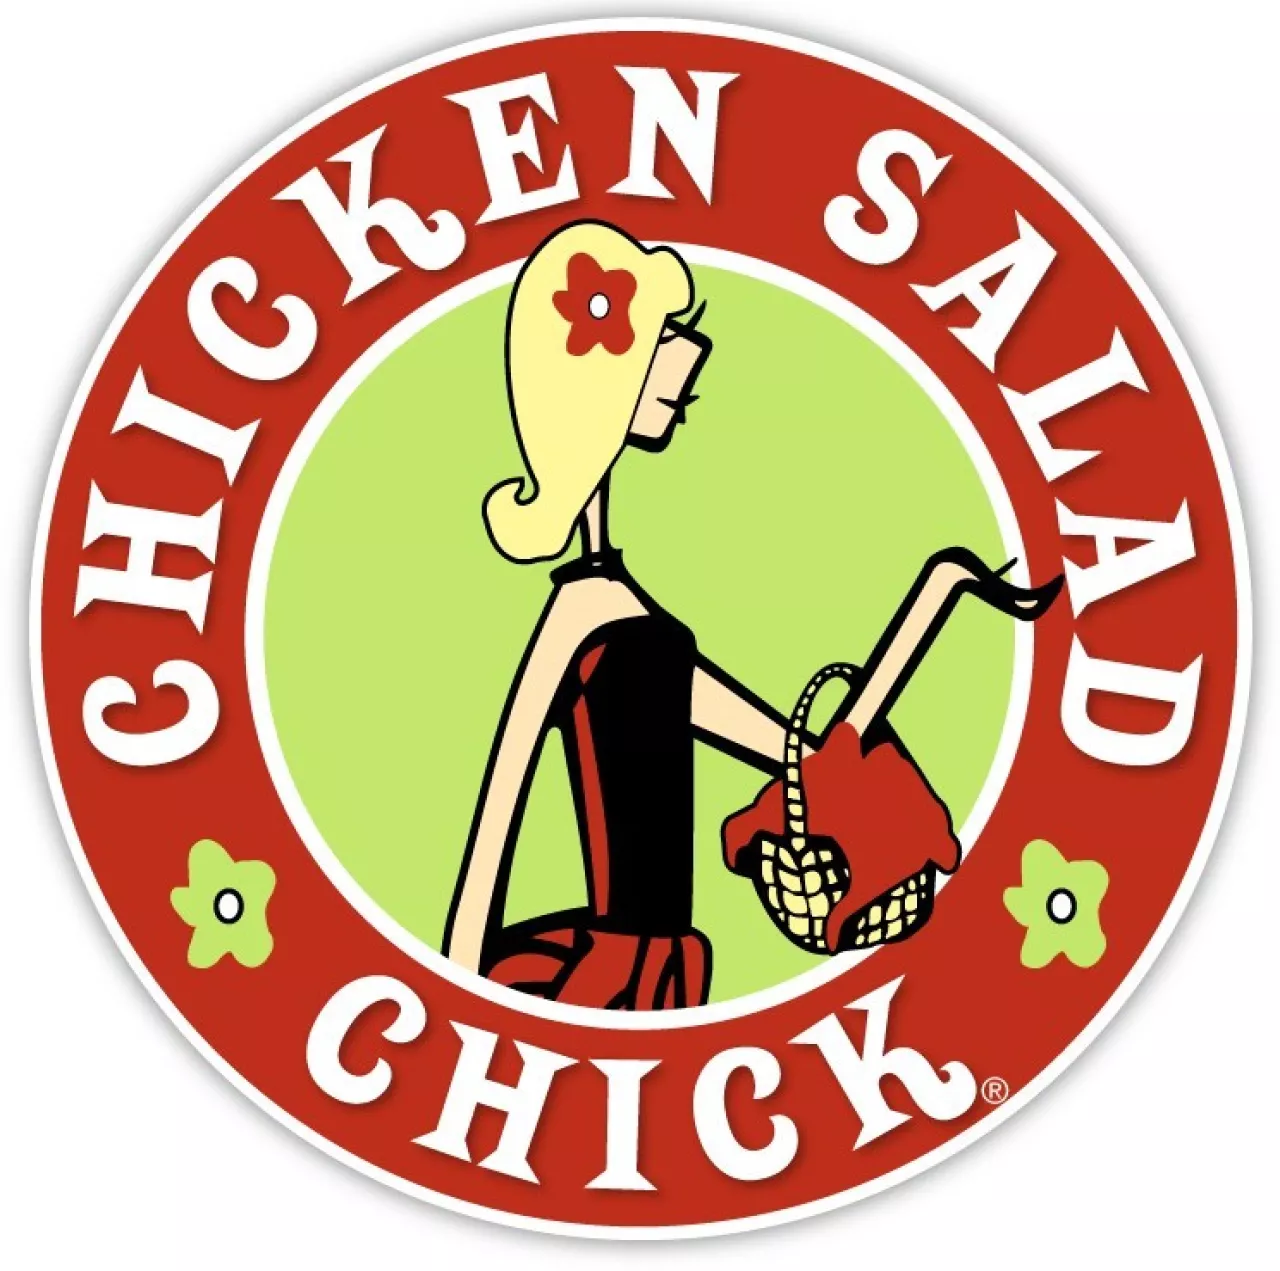 Chicken Salad Chick to open its first Fort Wayne restaurant, April 26